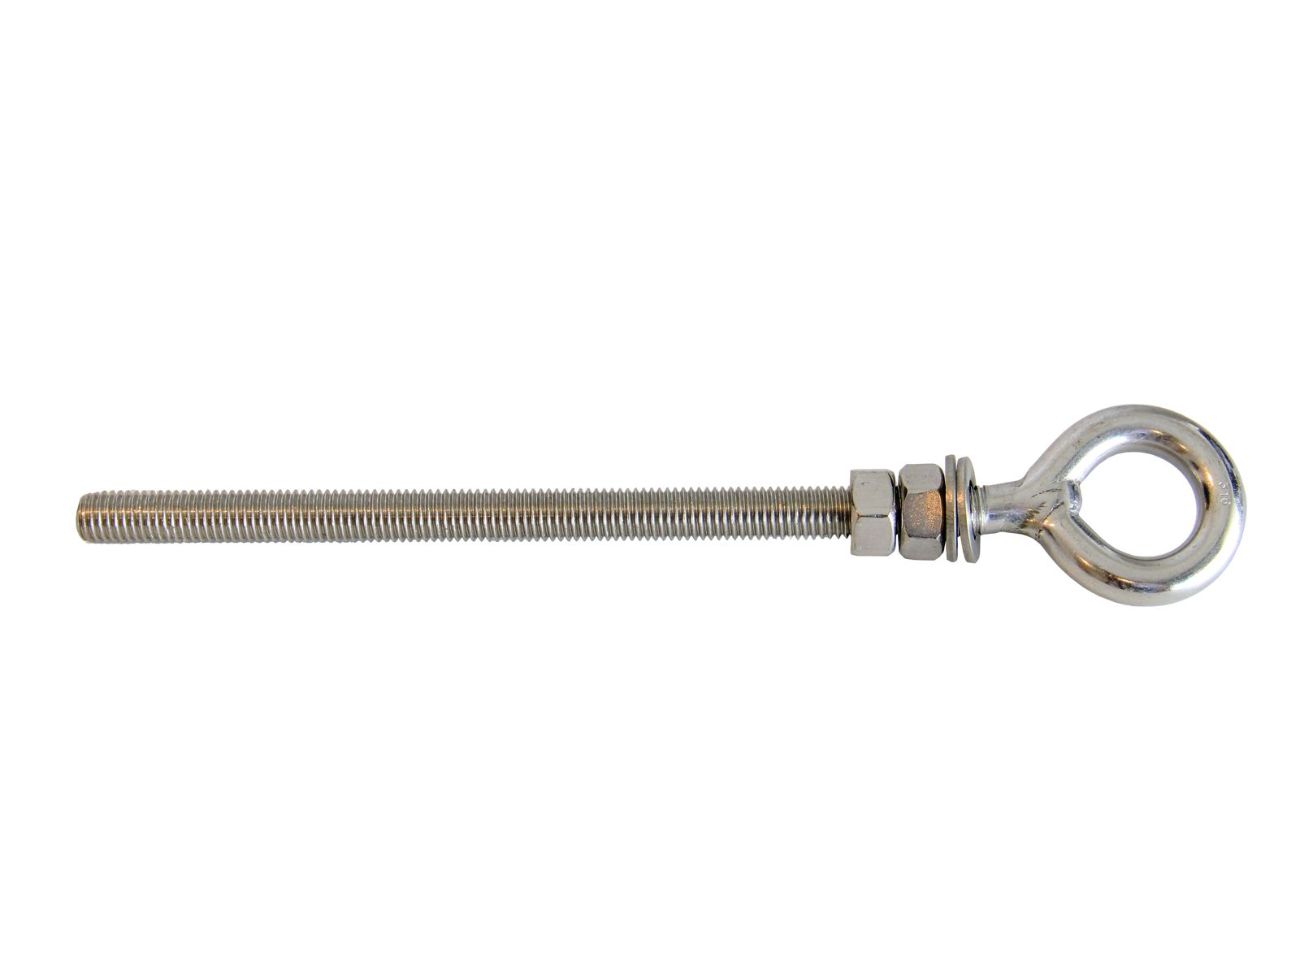 200mm stainless steel eyebolt for shade sails